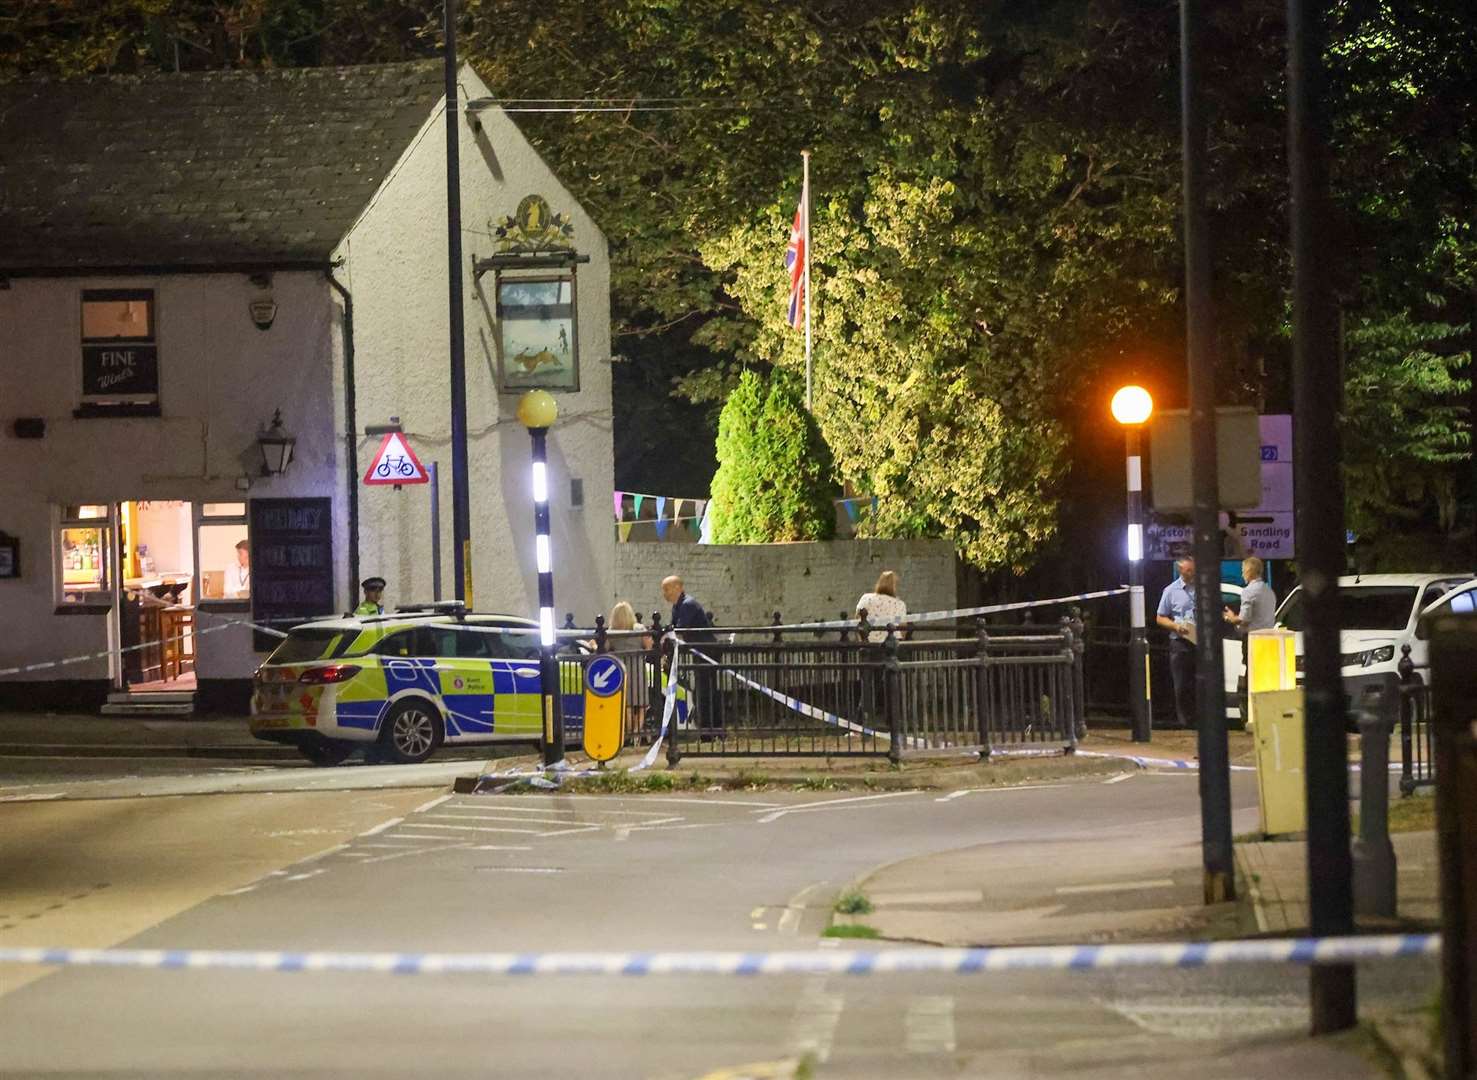 The road remained closed in the aftermath of the suspected murder in Maidstone. Picture: UKNIP